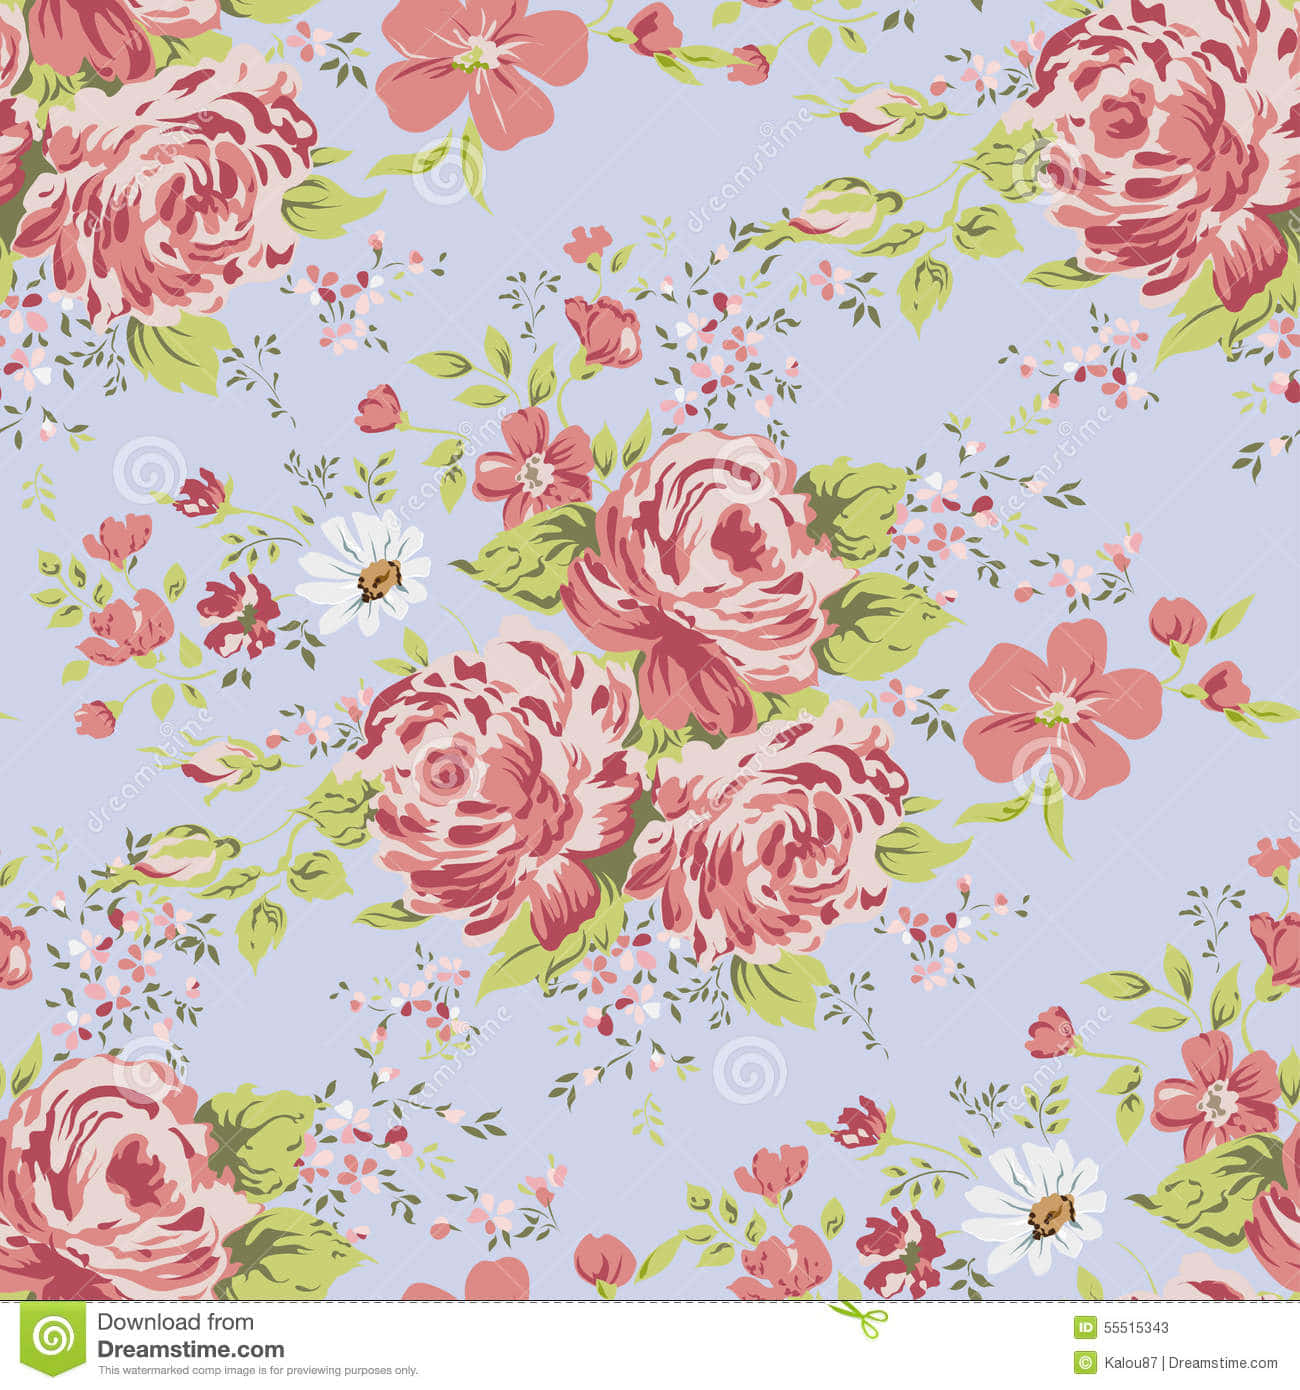 Download Floral Pattern With Pink Roses On A Blue Background Wallpaper ...